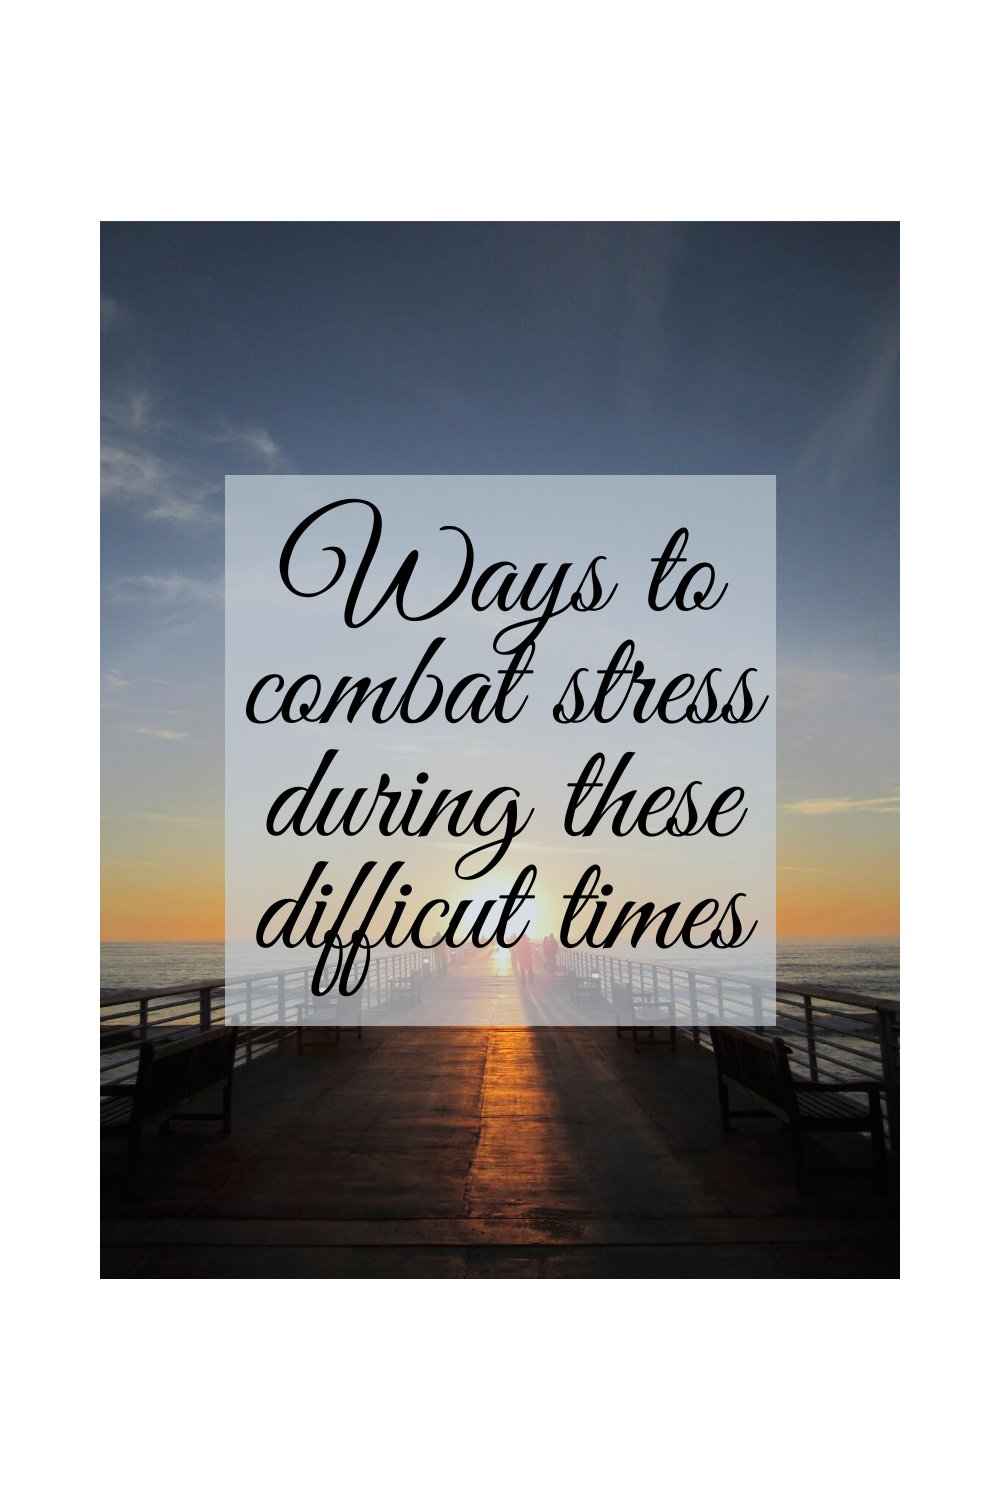 Ways to combat stress during these difficult times.